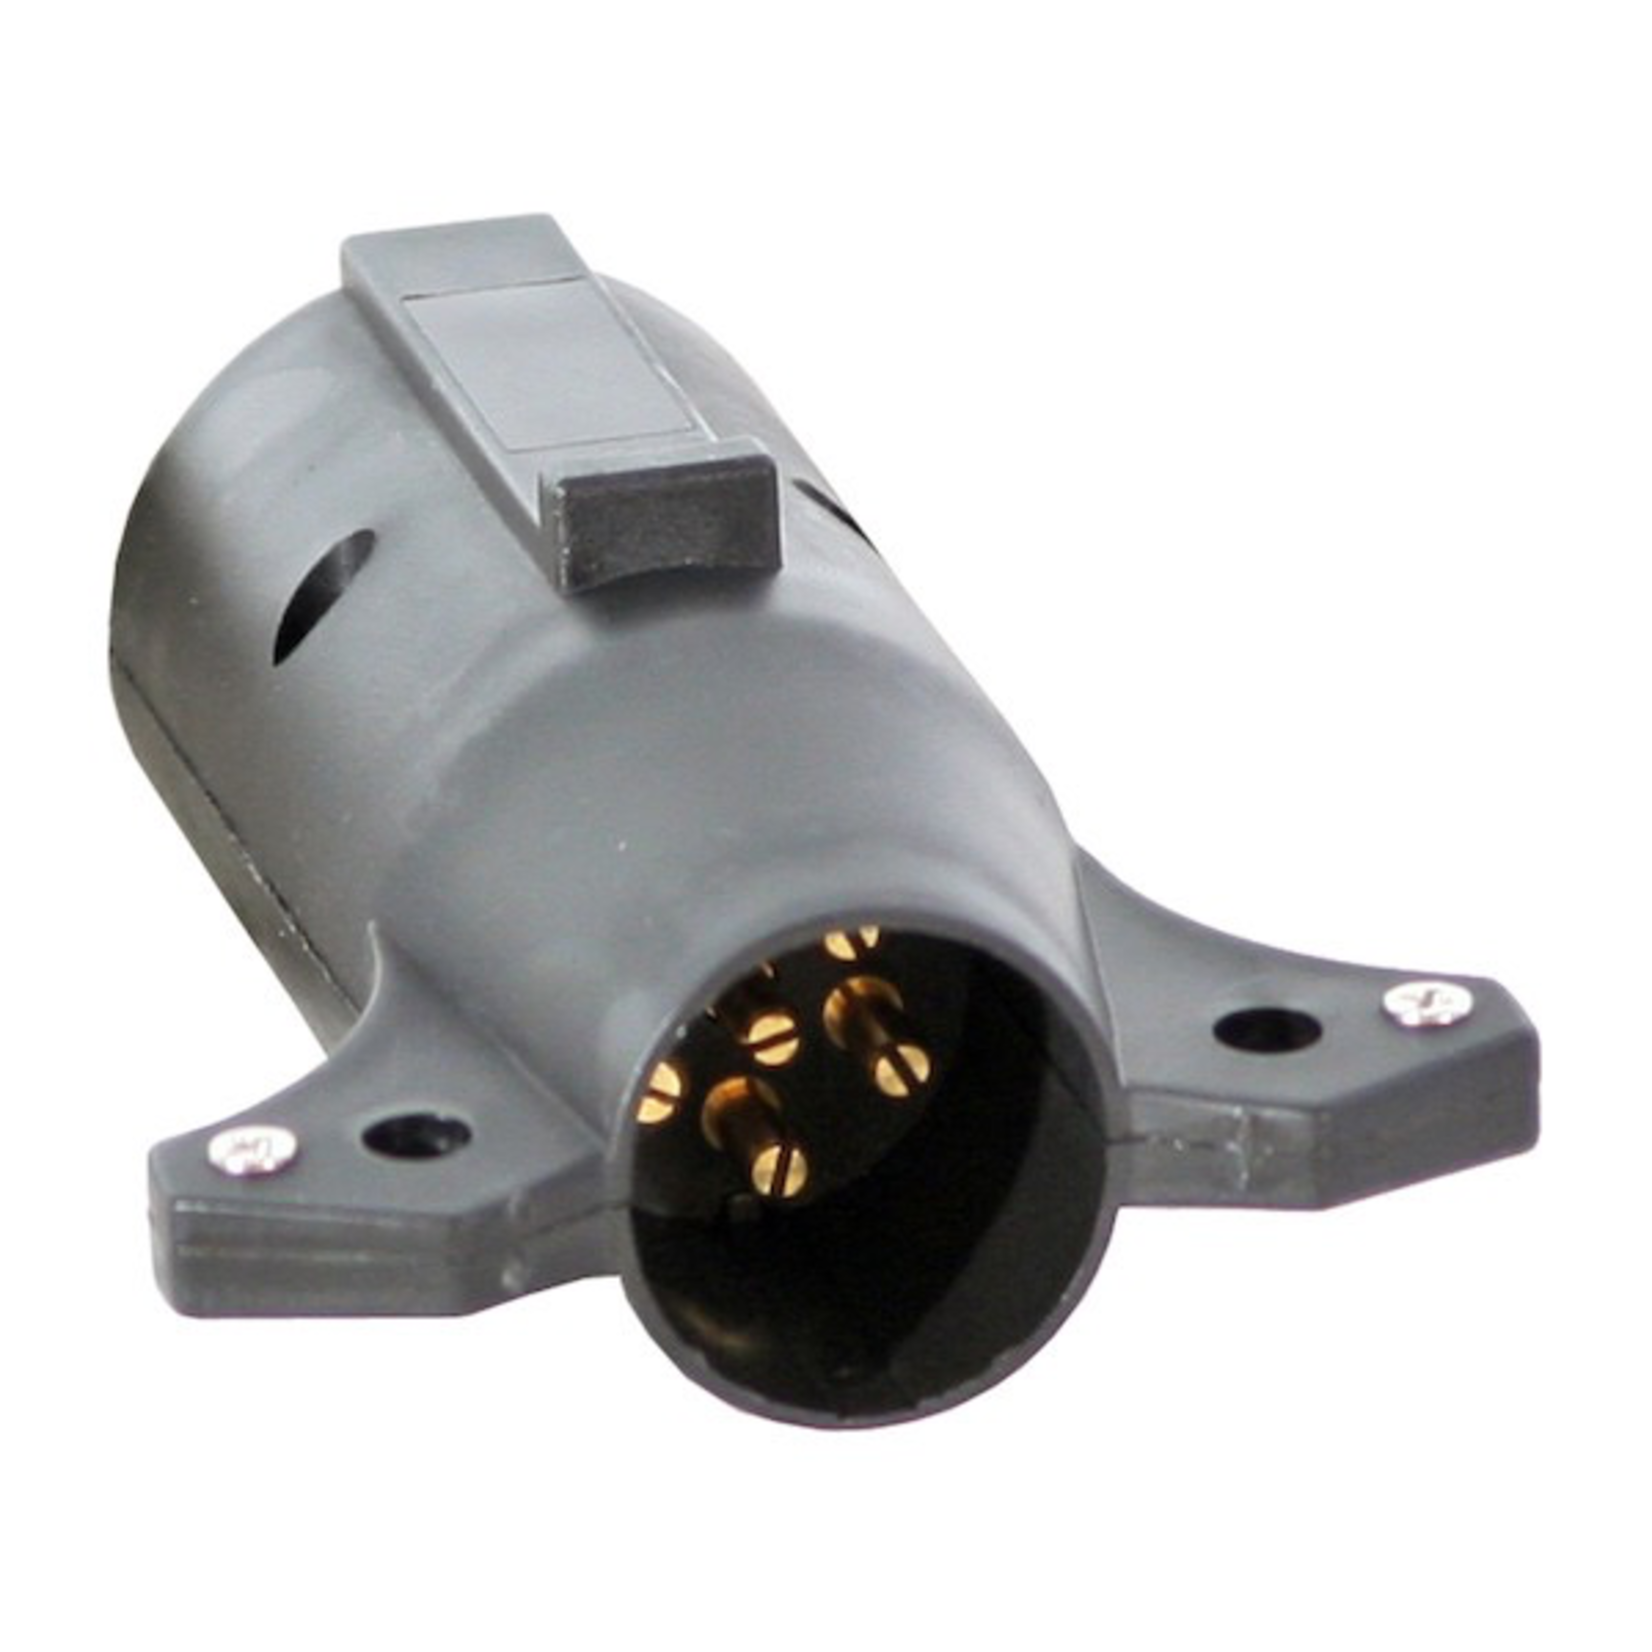 Buyers Trailer Plug Adapter, 7-Pin Flat To 6-Pin Round Adapter, Plastic (Center Pin Auxiliary Power)